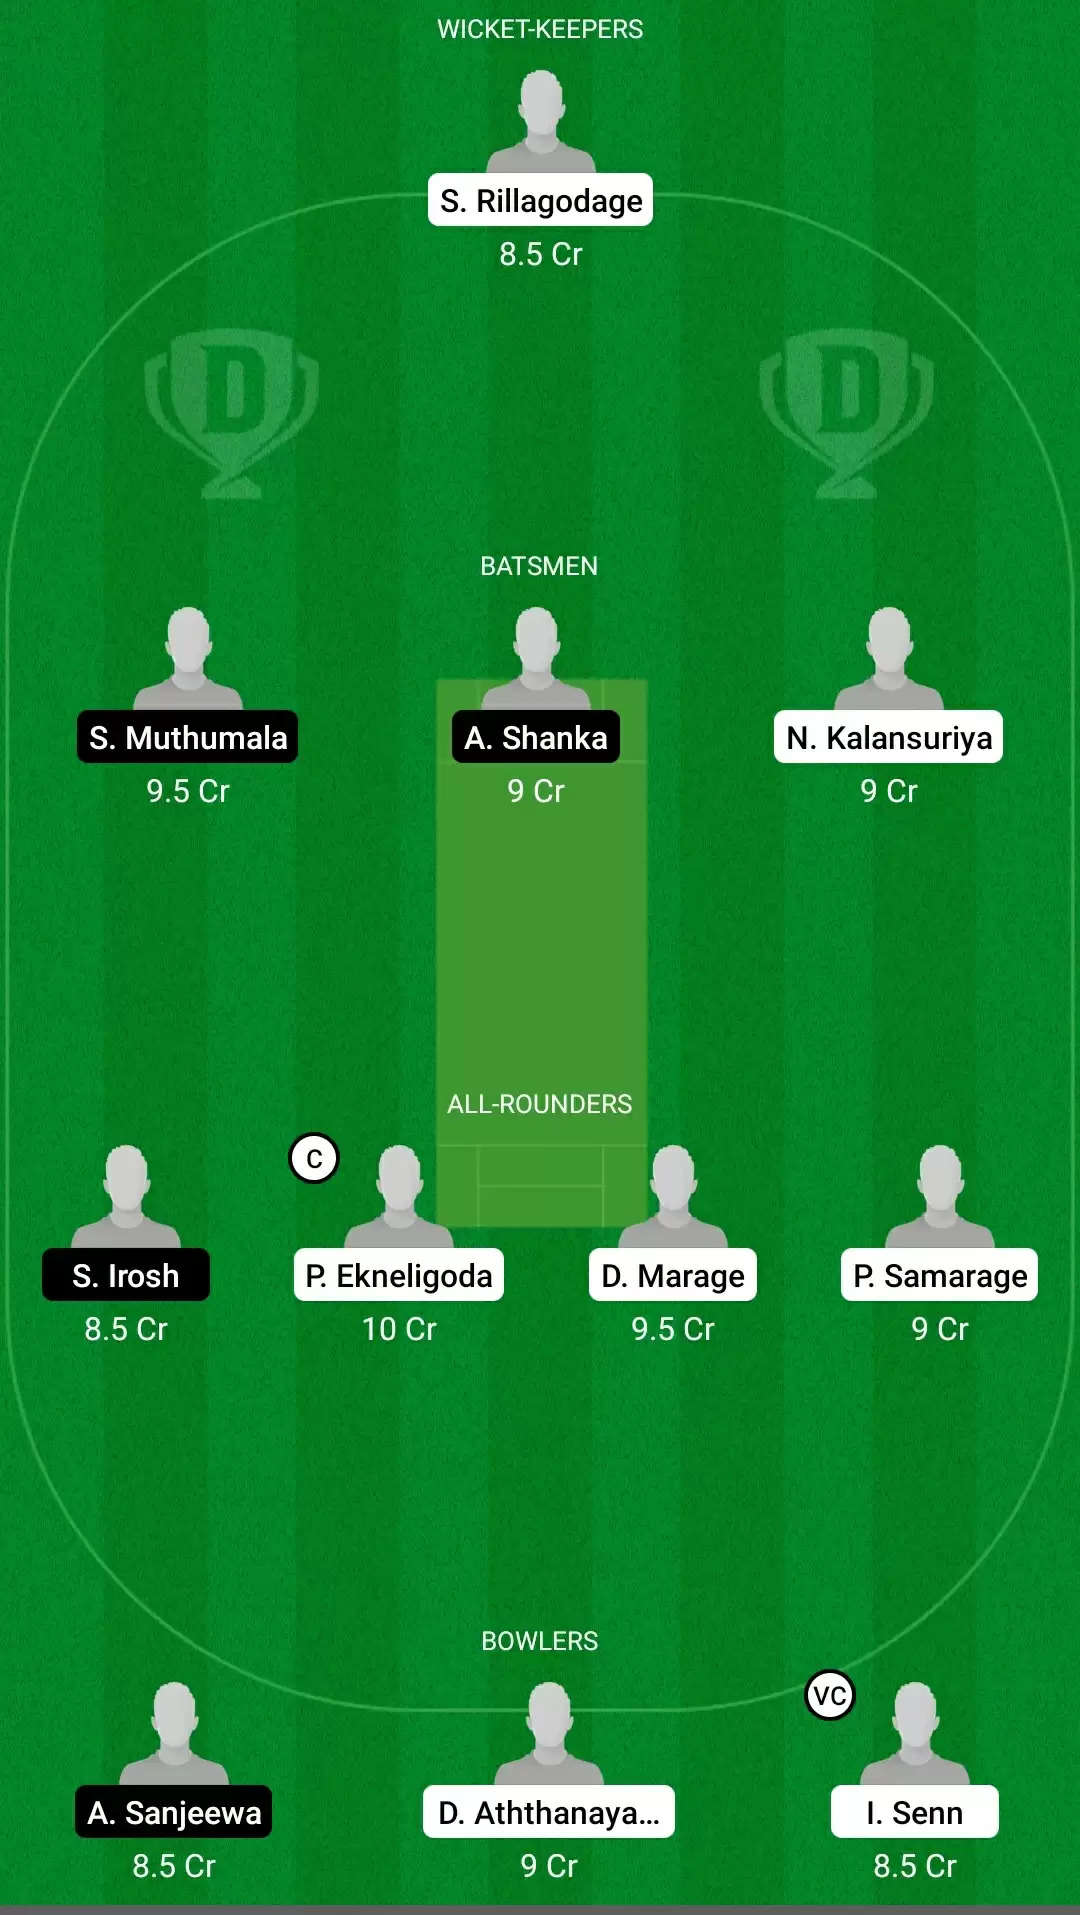 RCC vs KEL Dream11 Prediction for ECS T10 – Rome : Best Fantasy Cricket Tips, Playing XI, Team and Top Player Picks